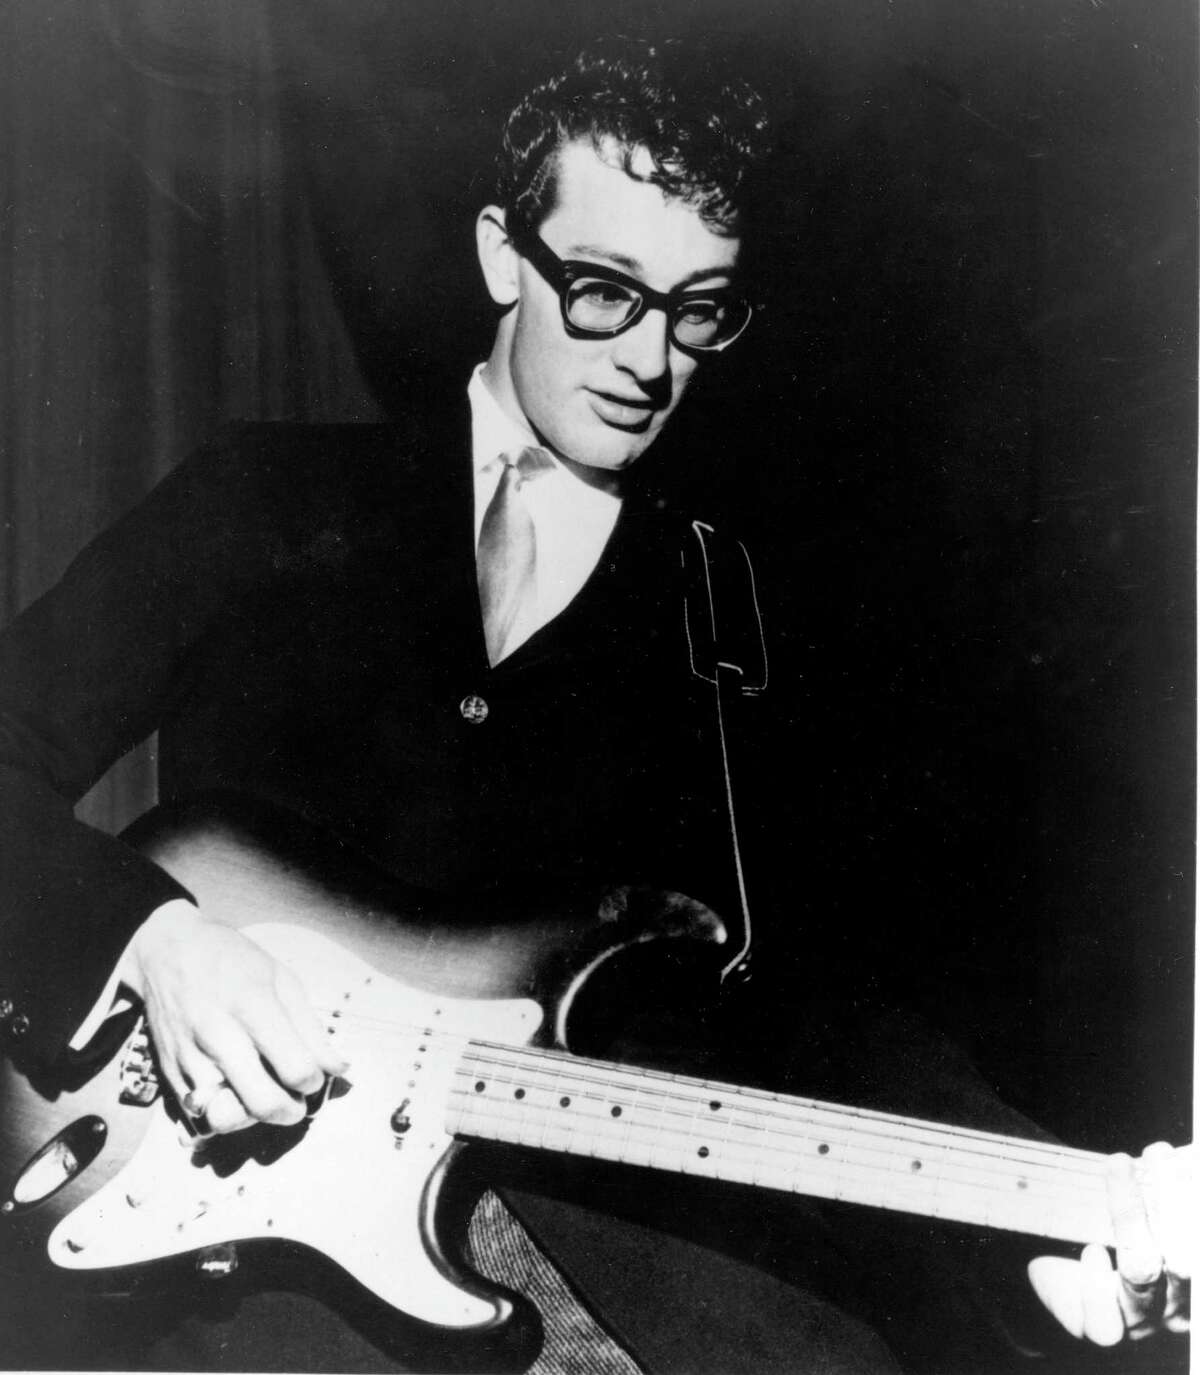 1959: Singer Buddy Holly died in a plane crash that also killed musicians Ritchie Valens and The Big Bopper.